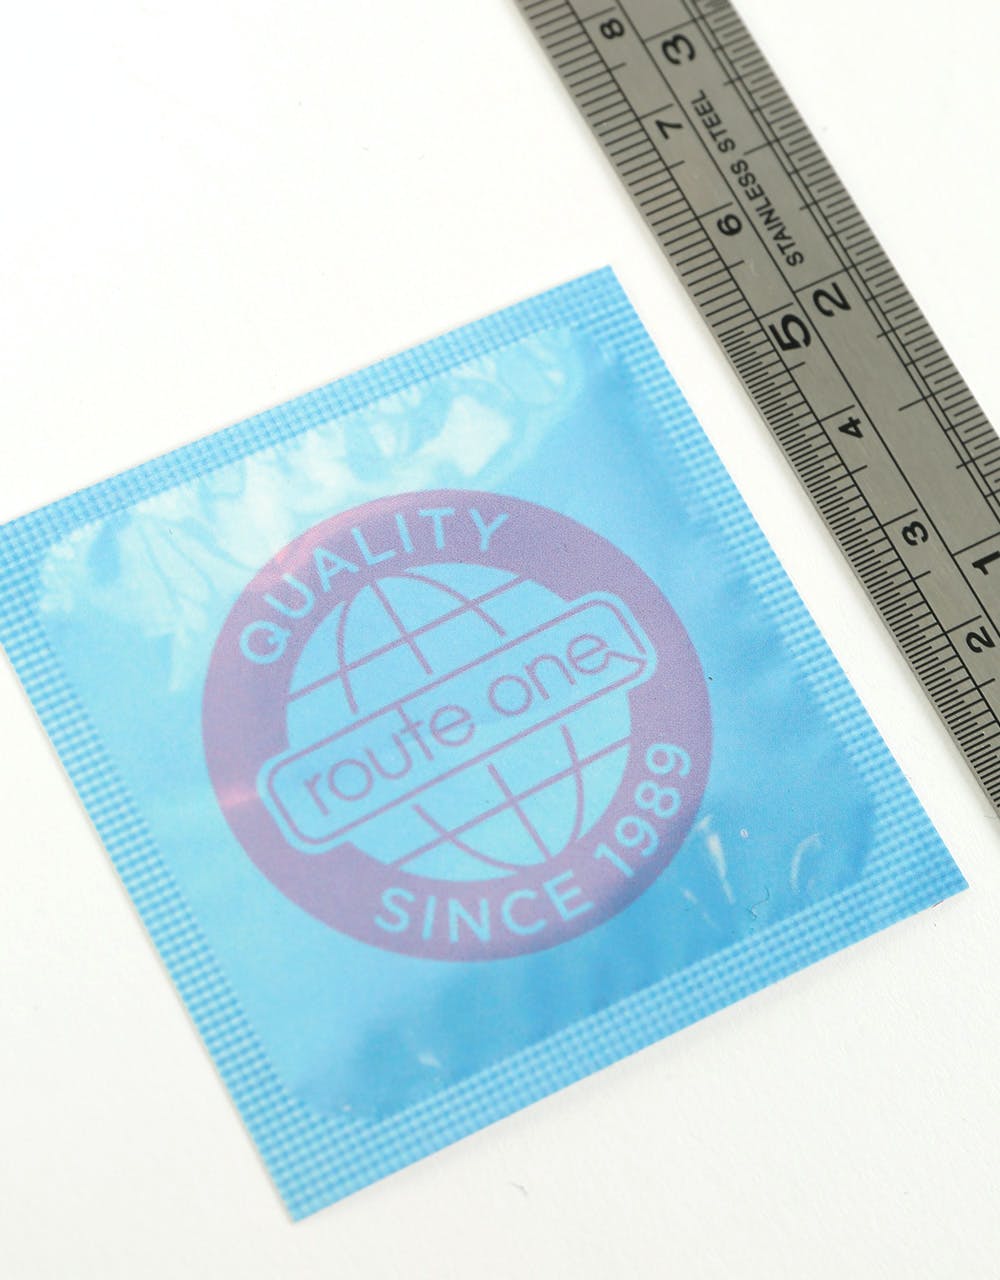 Route One Protection Logo Sticker - Blue/Pink